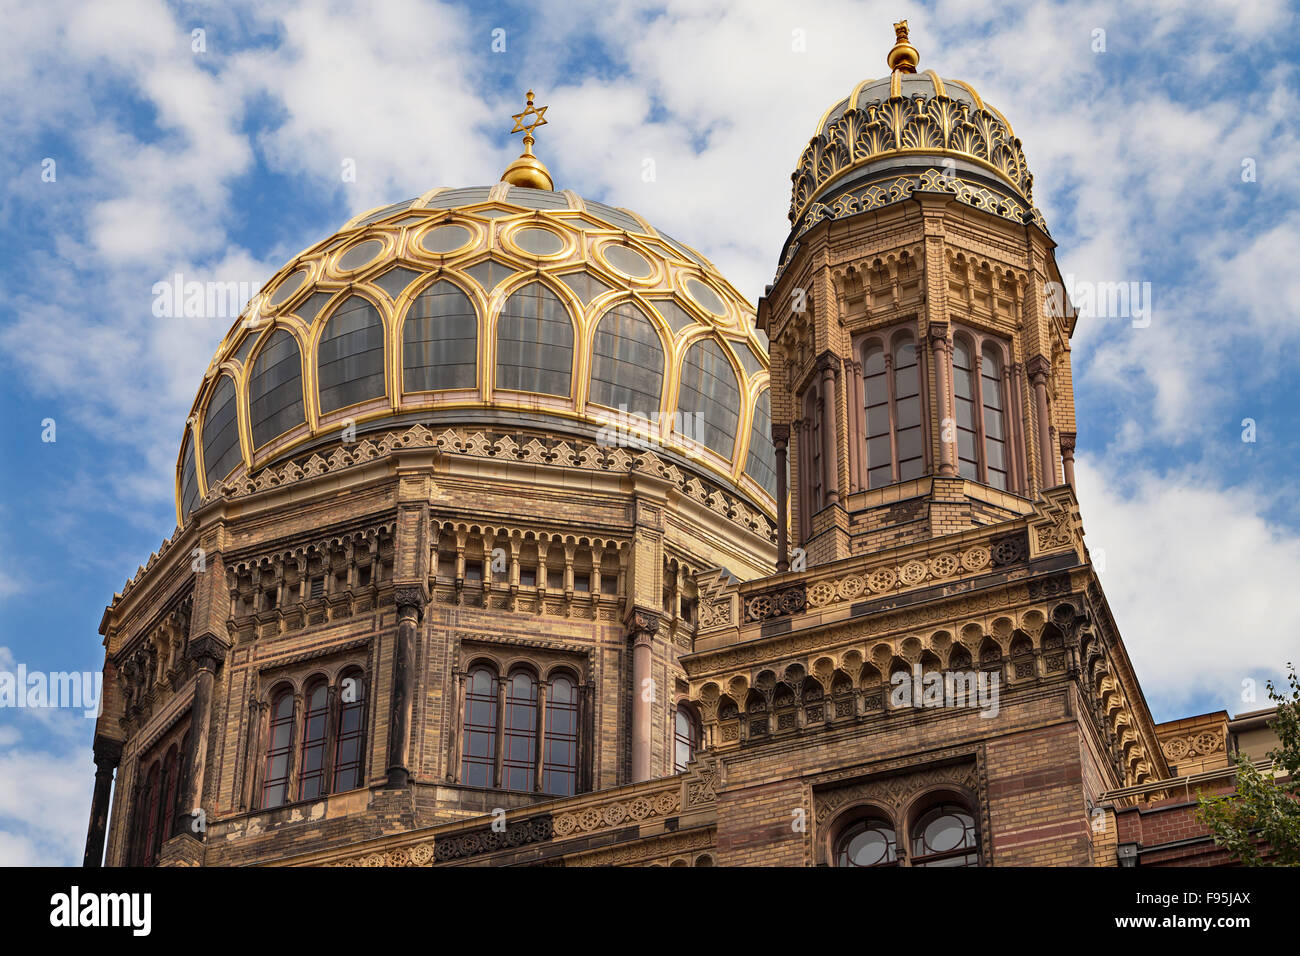 Cupola of the New Synagogue in Berlin, Germany. Stock Photo